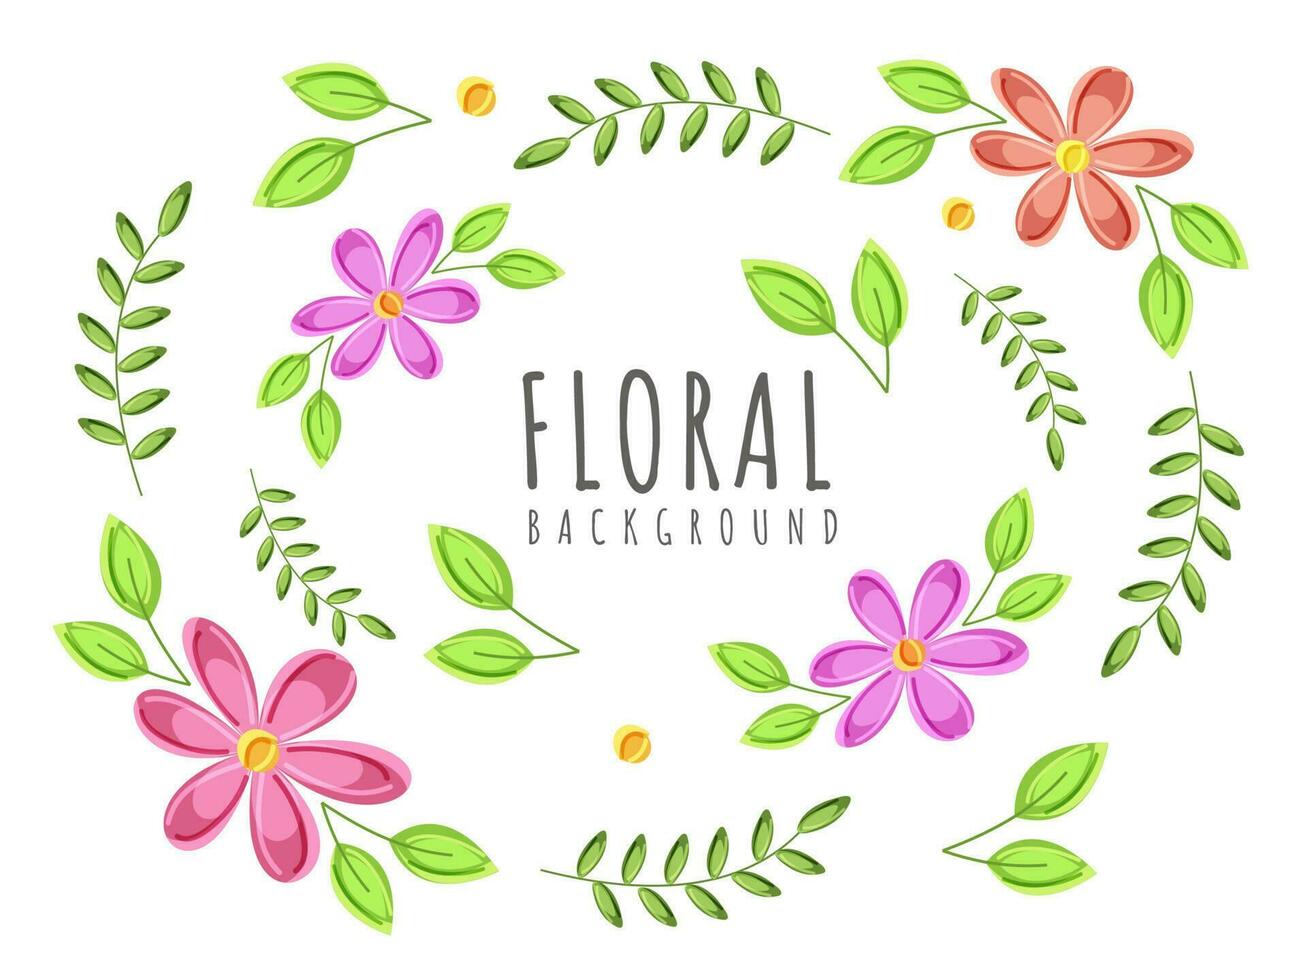 Floral Background Decorated With Flowers And Green Leaves. vector